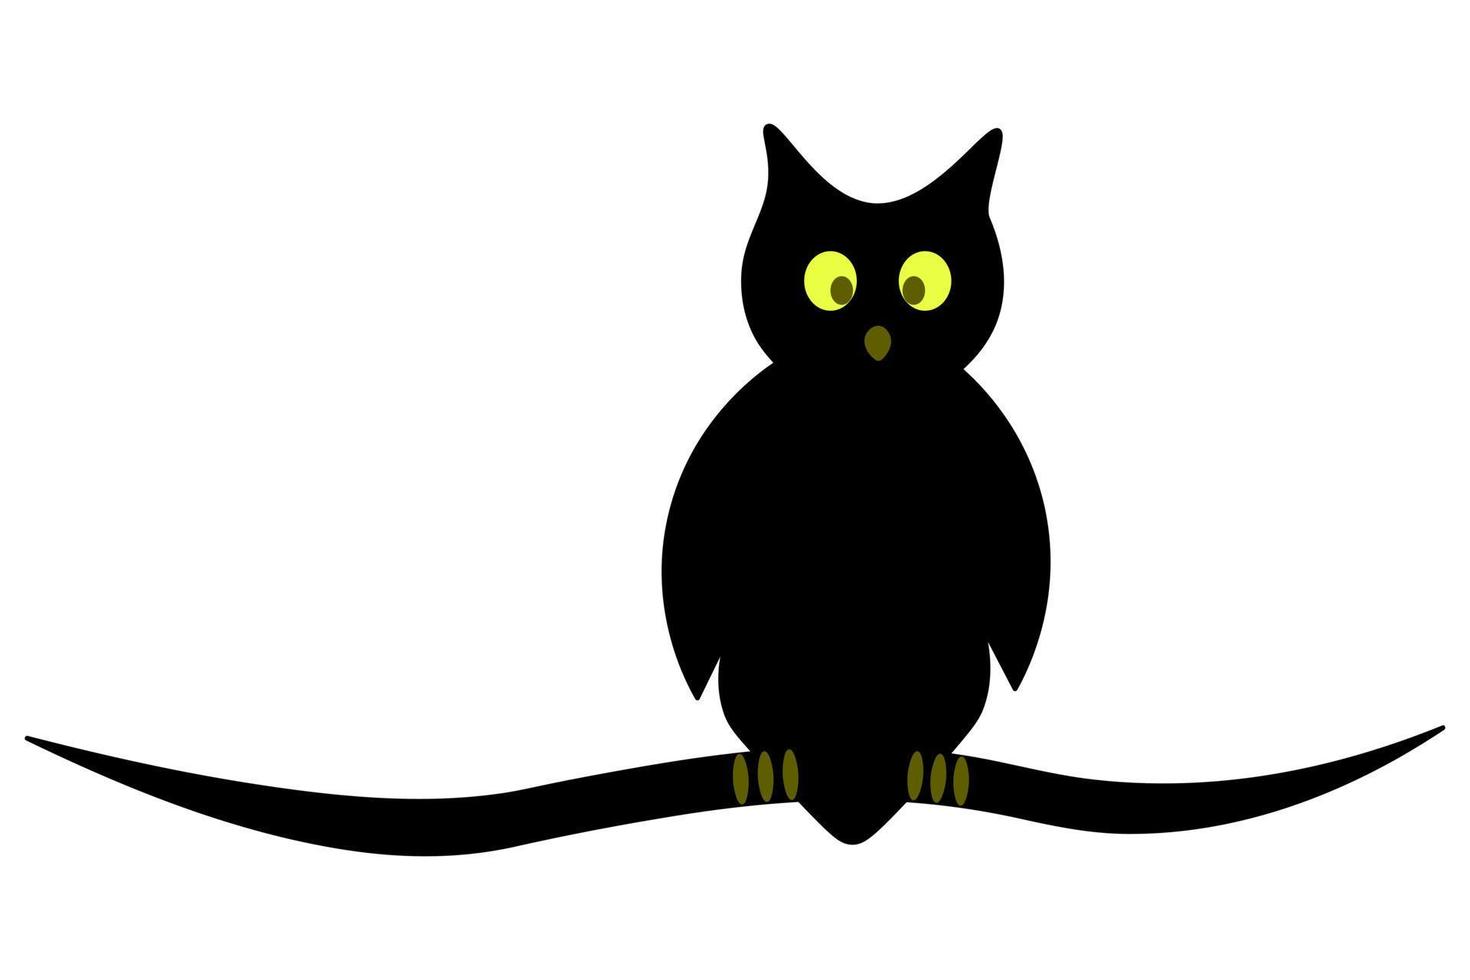 Owl. Silhouette of a bird with glowing eyes. A wise bird sits on a branch. Vector illustration. A nocturnal predator with sharp claws. Isolated white background. Halloween symbol. All Saints Day.